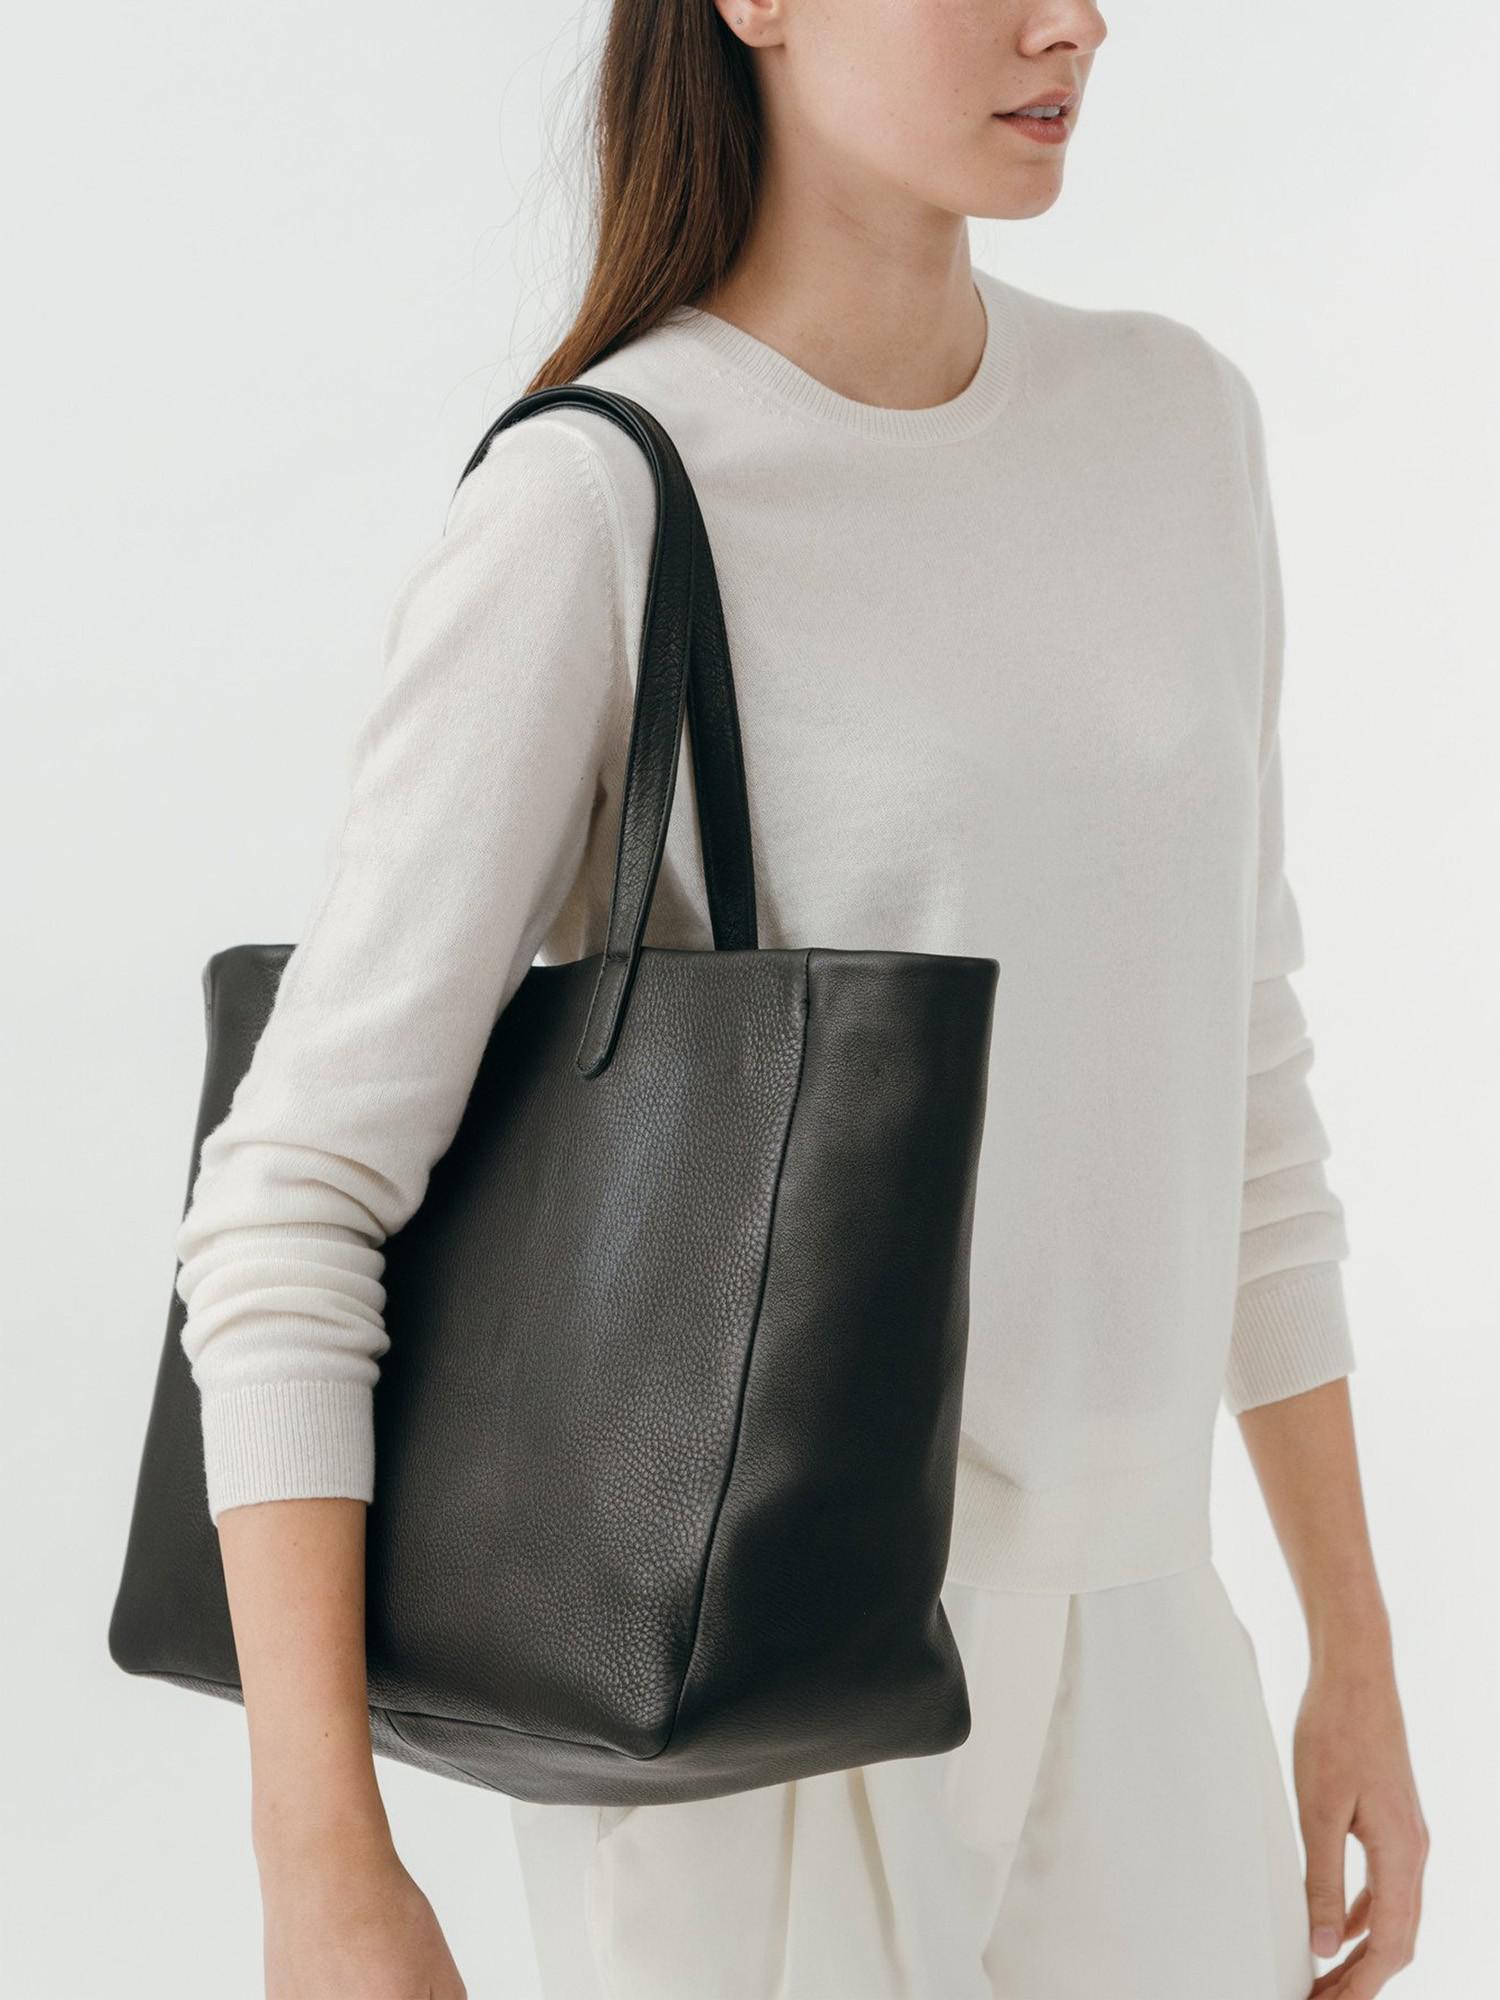 BAGGU Leather Oversized Tote in Black - Lyst